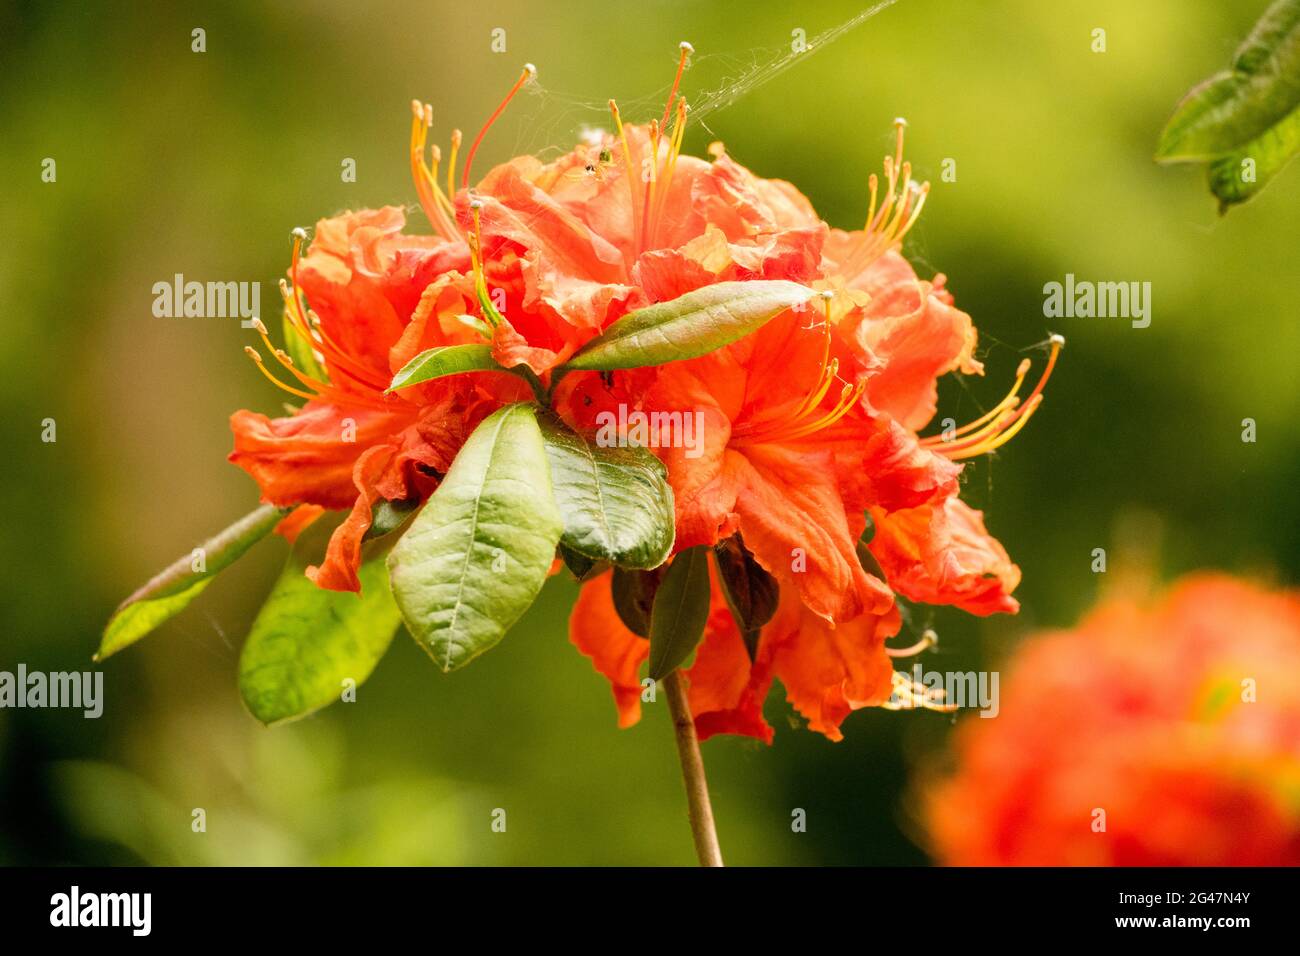 Orange Rhododendron Royal Command flower Stock Photo